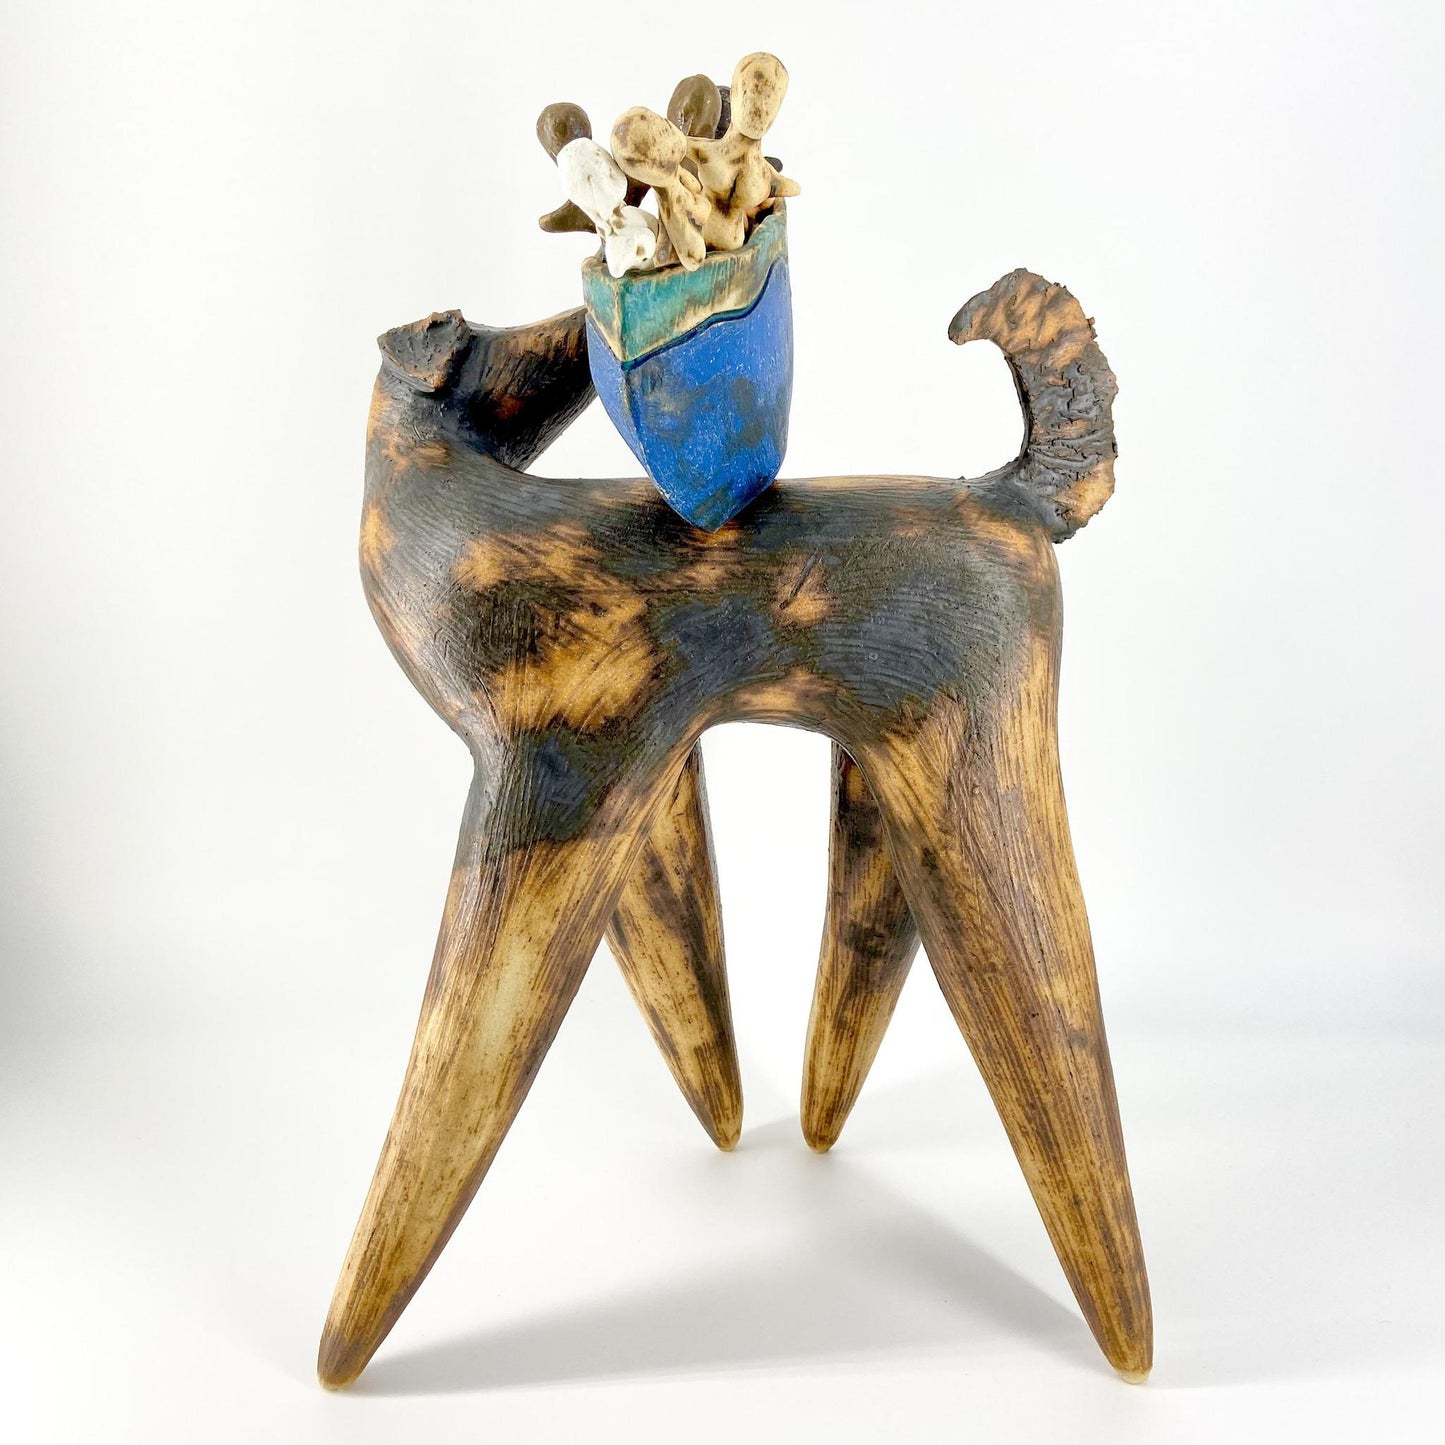 Sculpture - Dog with Boat/Filled with People - Ceramic - Large